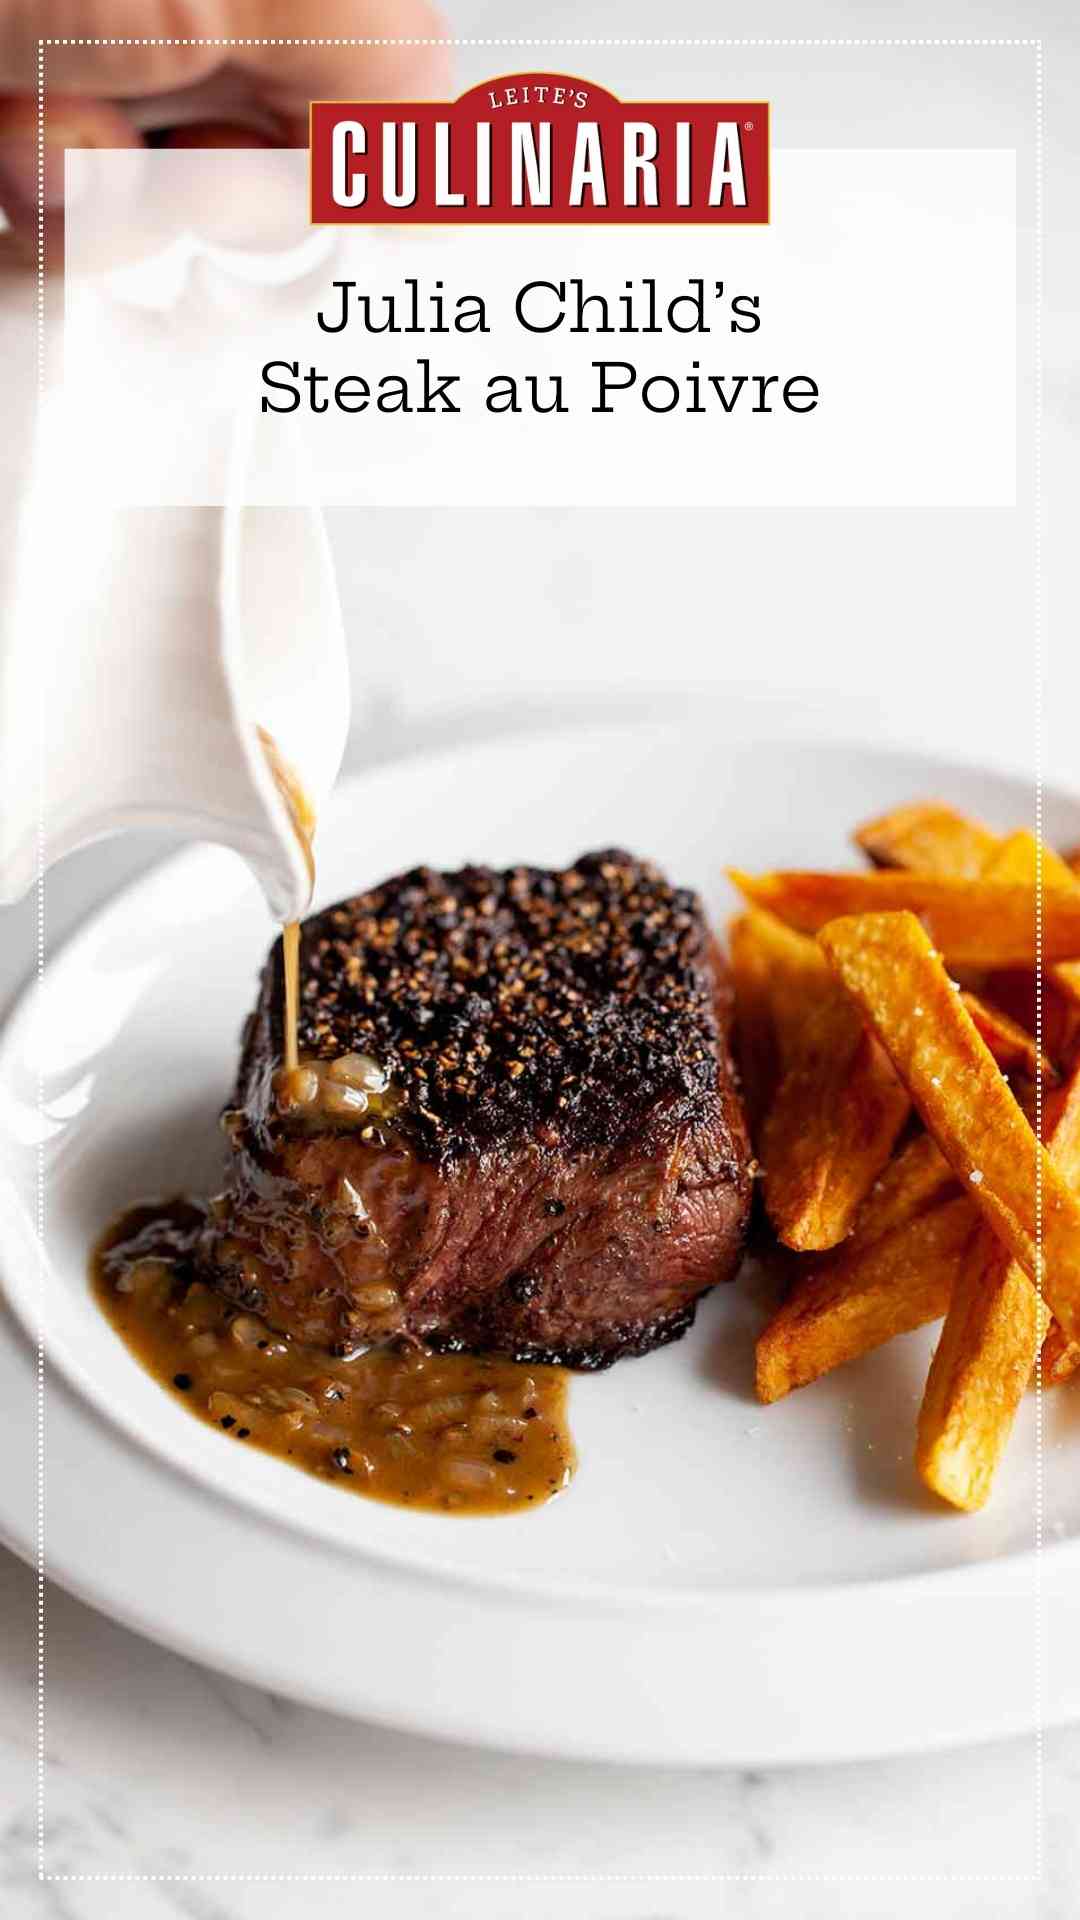 A person drizzling sauce over a steak au poivre on a white plate with sweet potato fries.